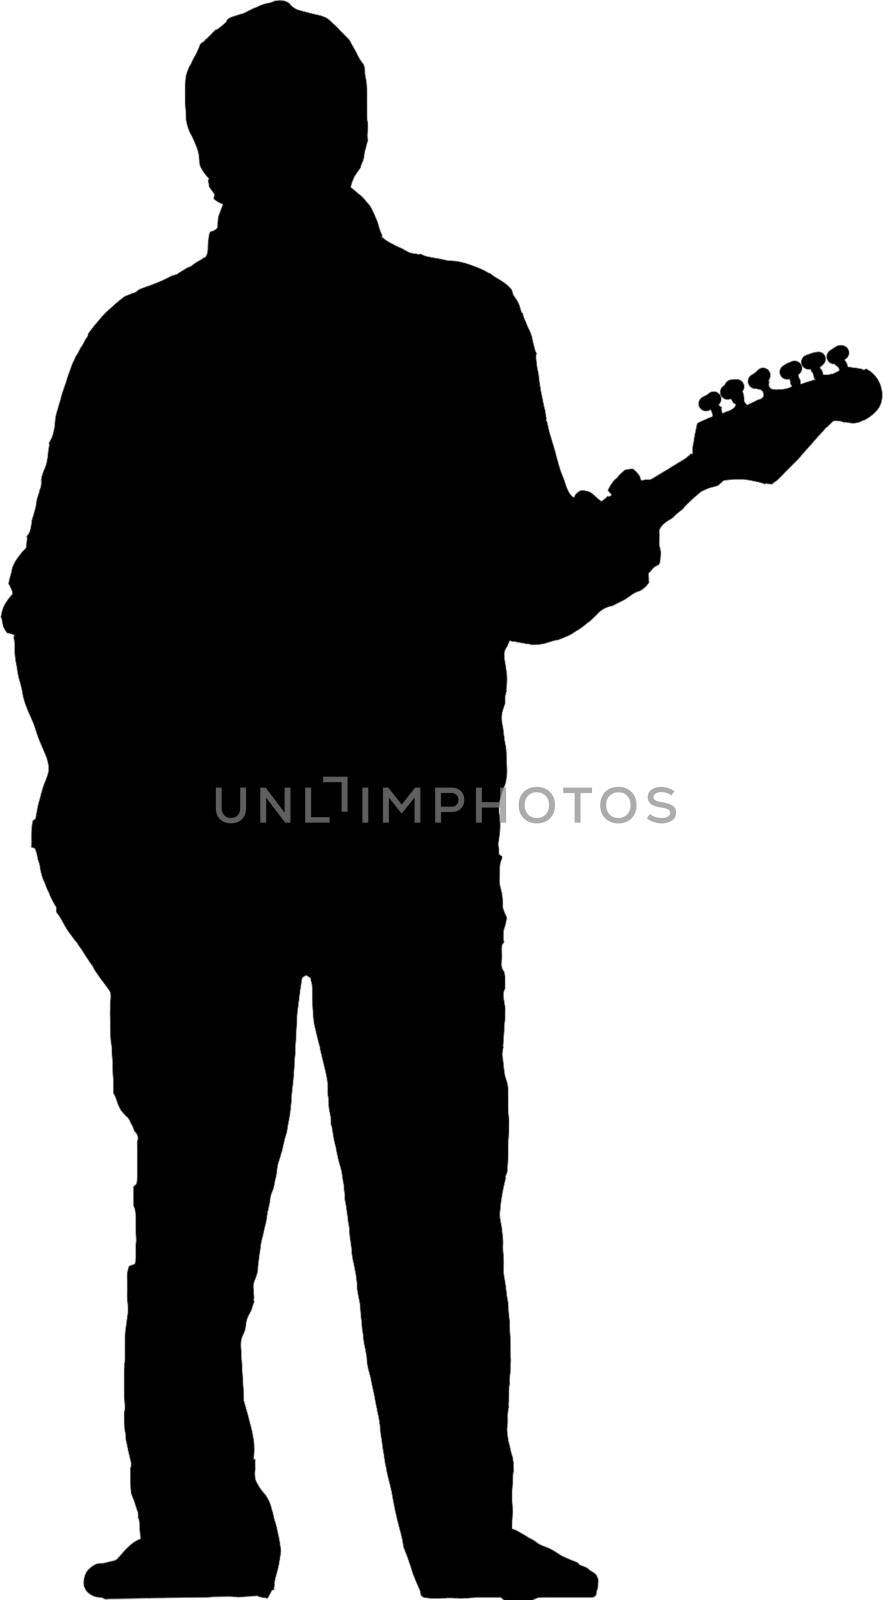 Black silhouette of a still guitarist, on white background